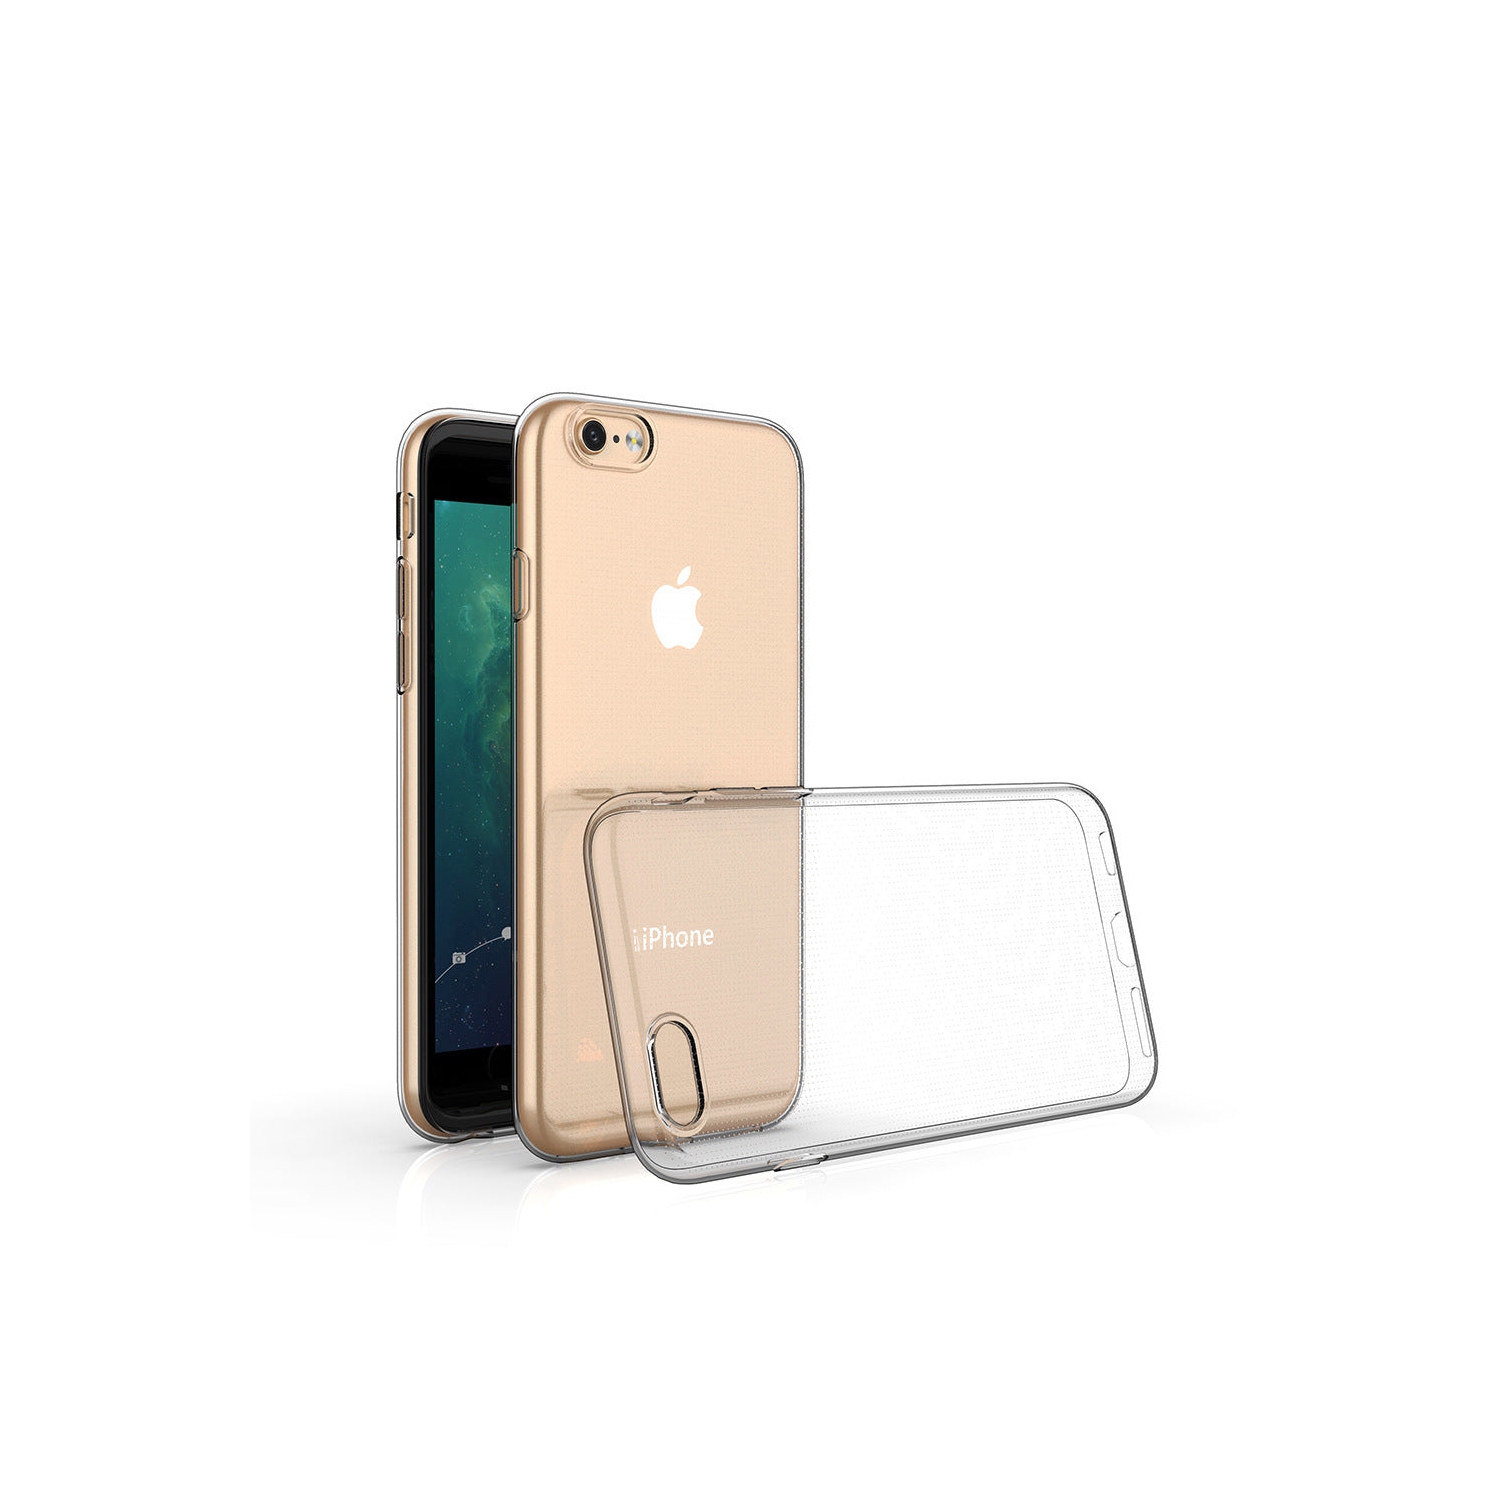 PANDACO Clear Case for iPhone 6 Plus or iPhone 6S Plus